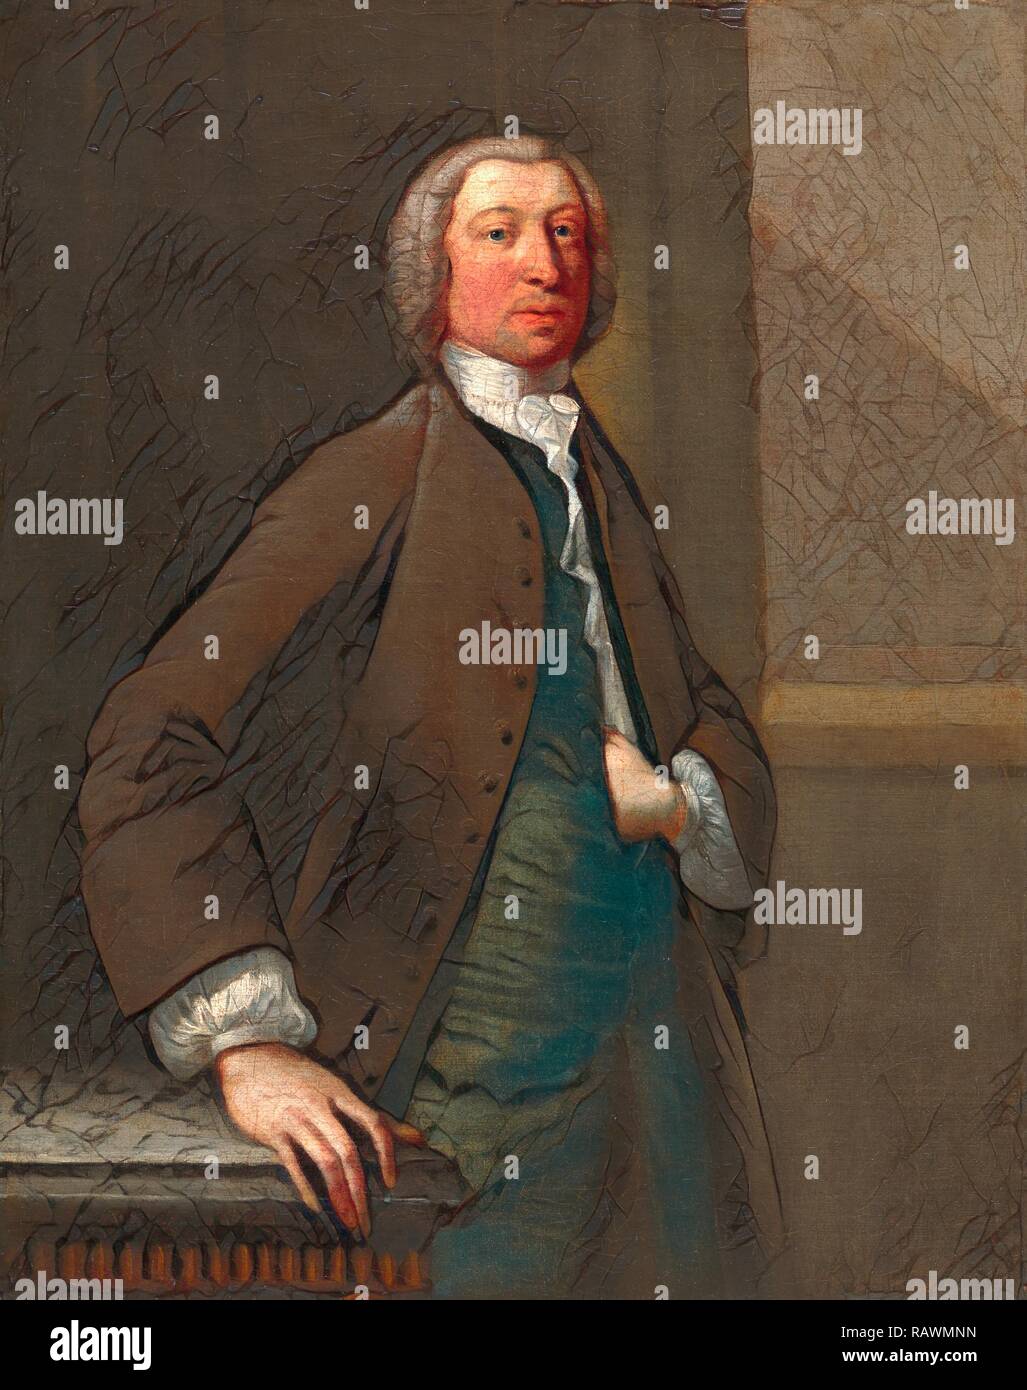 Tobias Smollett, Perhaps by Robert Scaddon, active 1743-1774, British. Reimagined by Gibon. Classic art with a modern reimagined Stock Photo